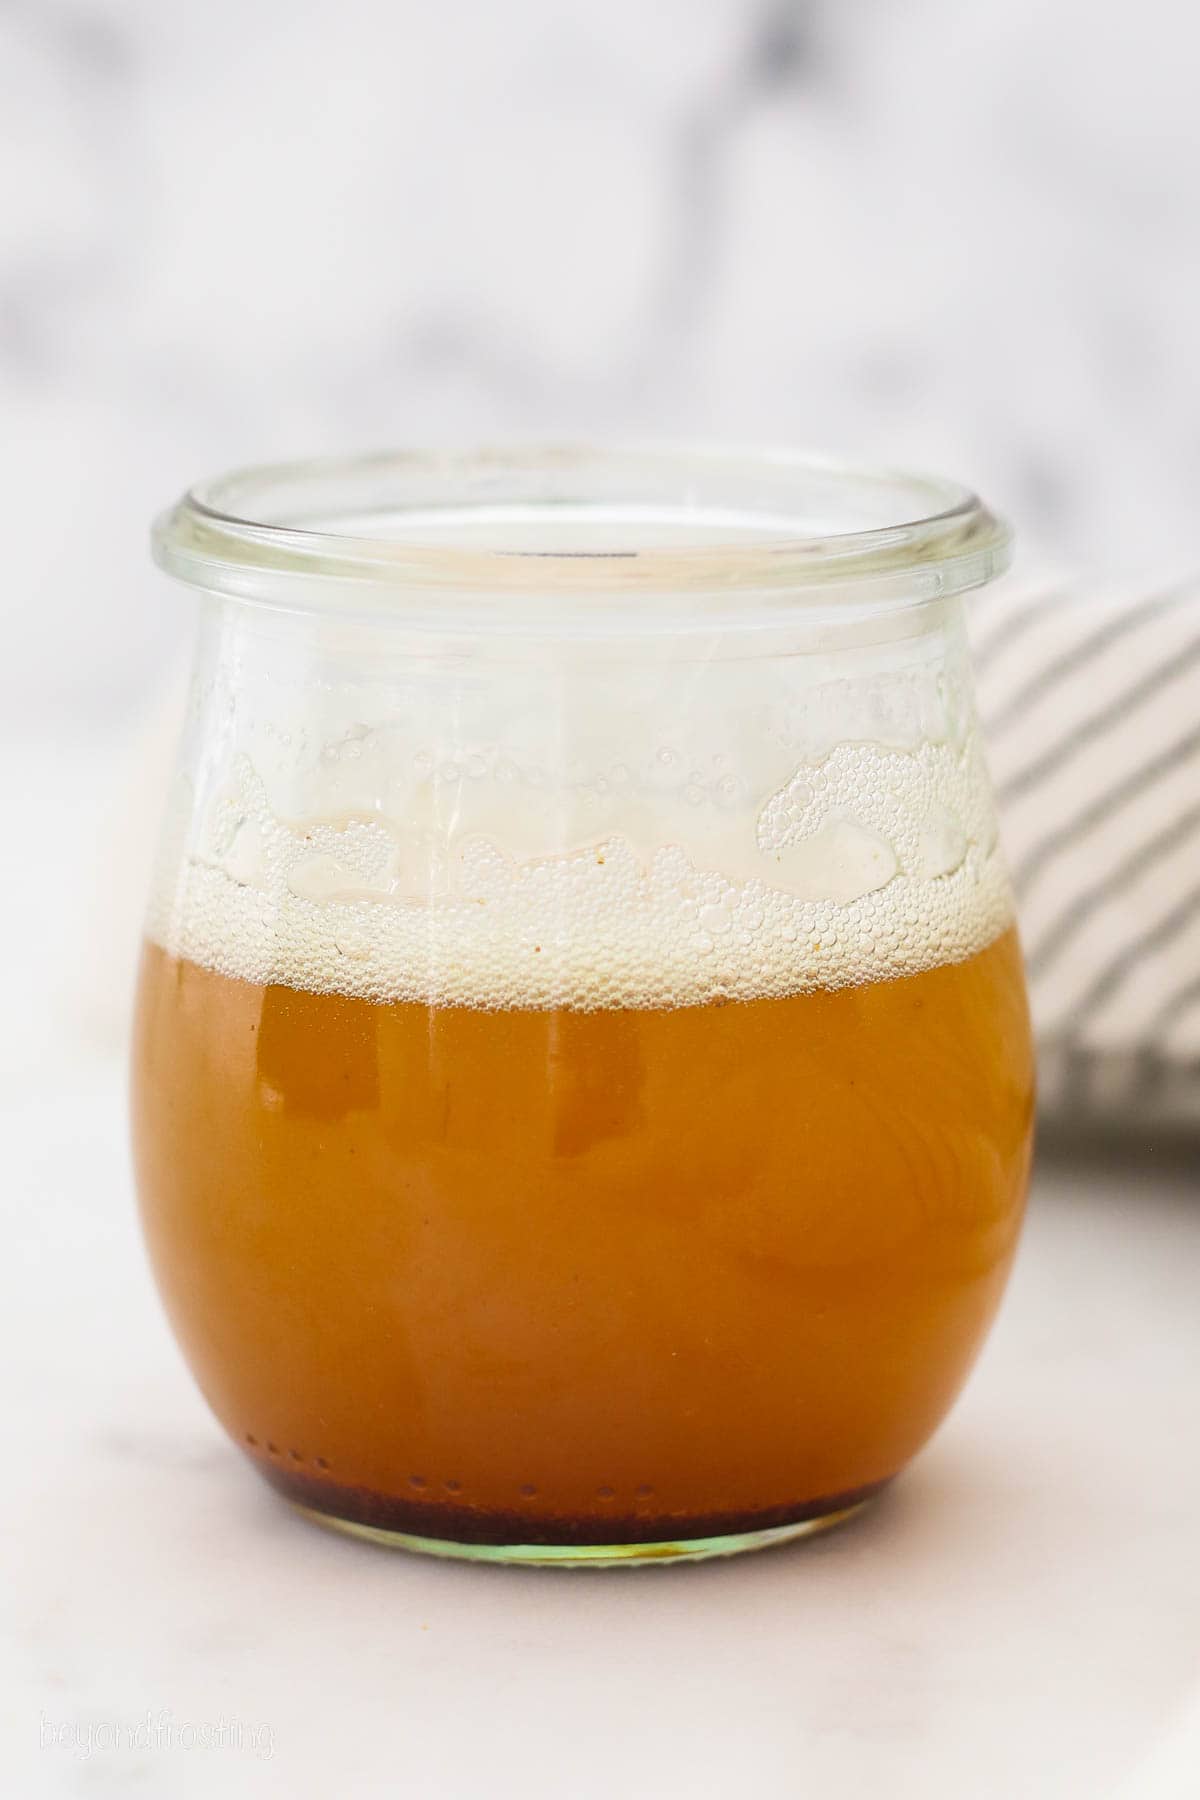 Brown butter in a glass jar on a countertop.